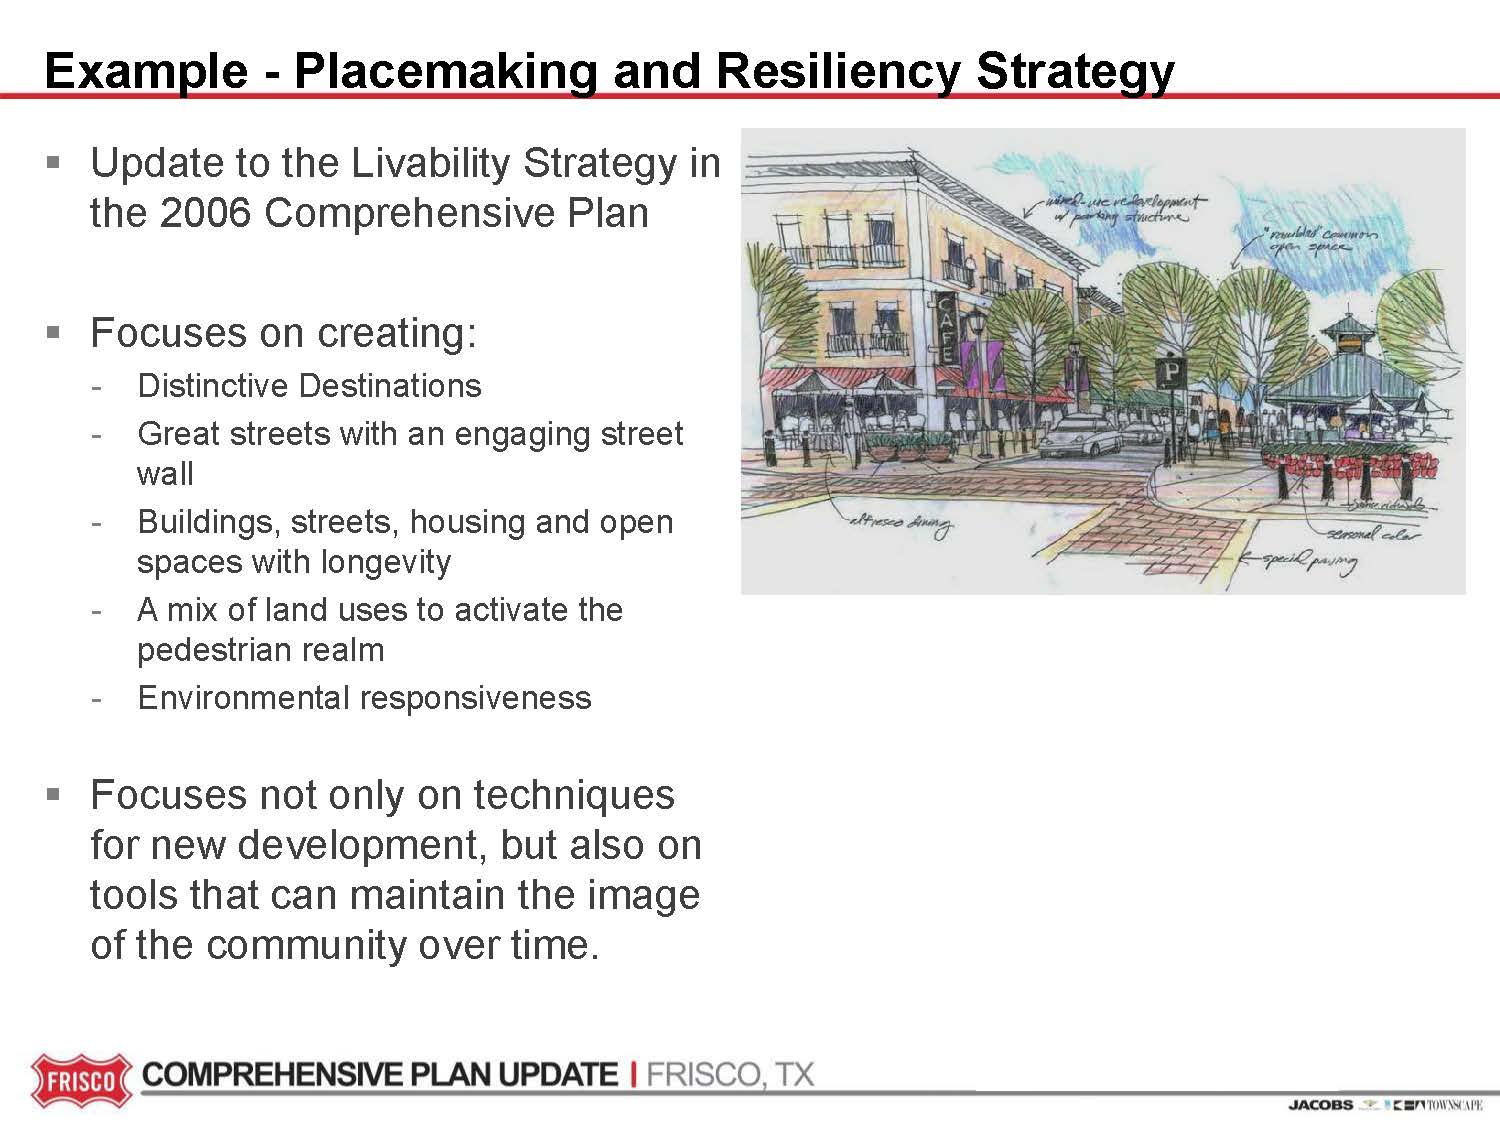 Review the draft 2015 Comprehensive Plan